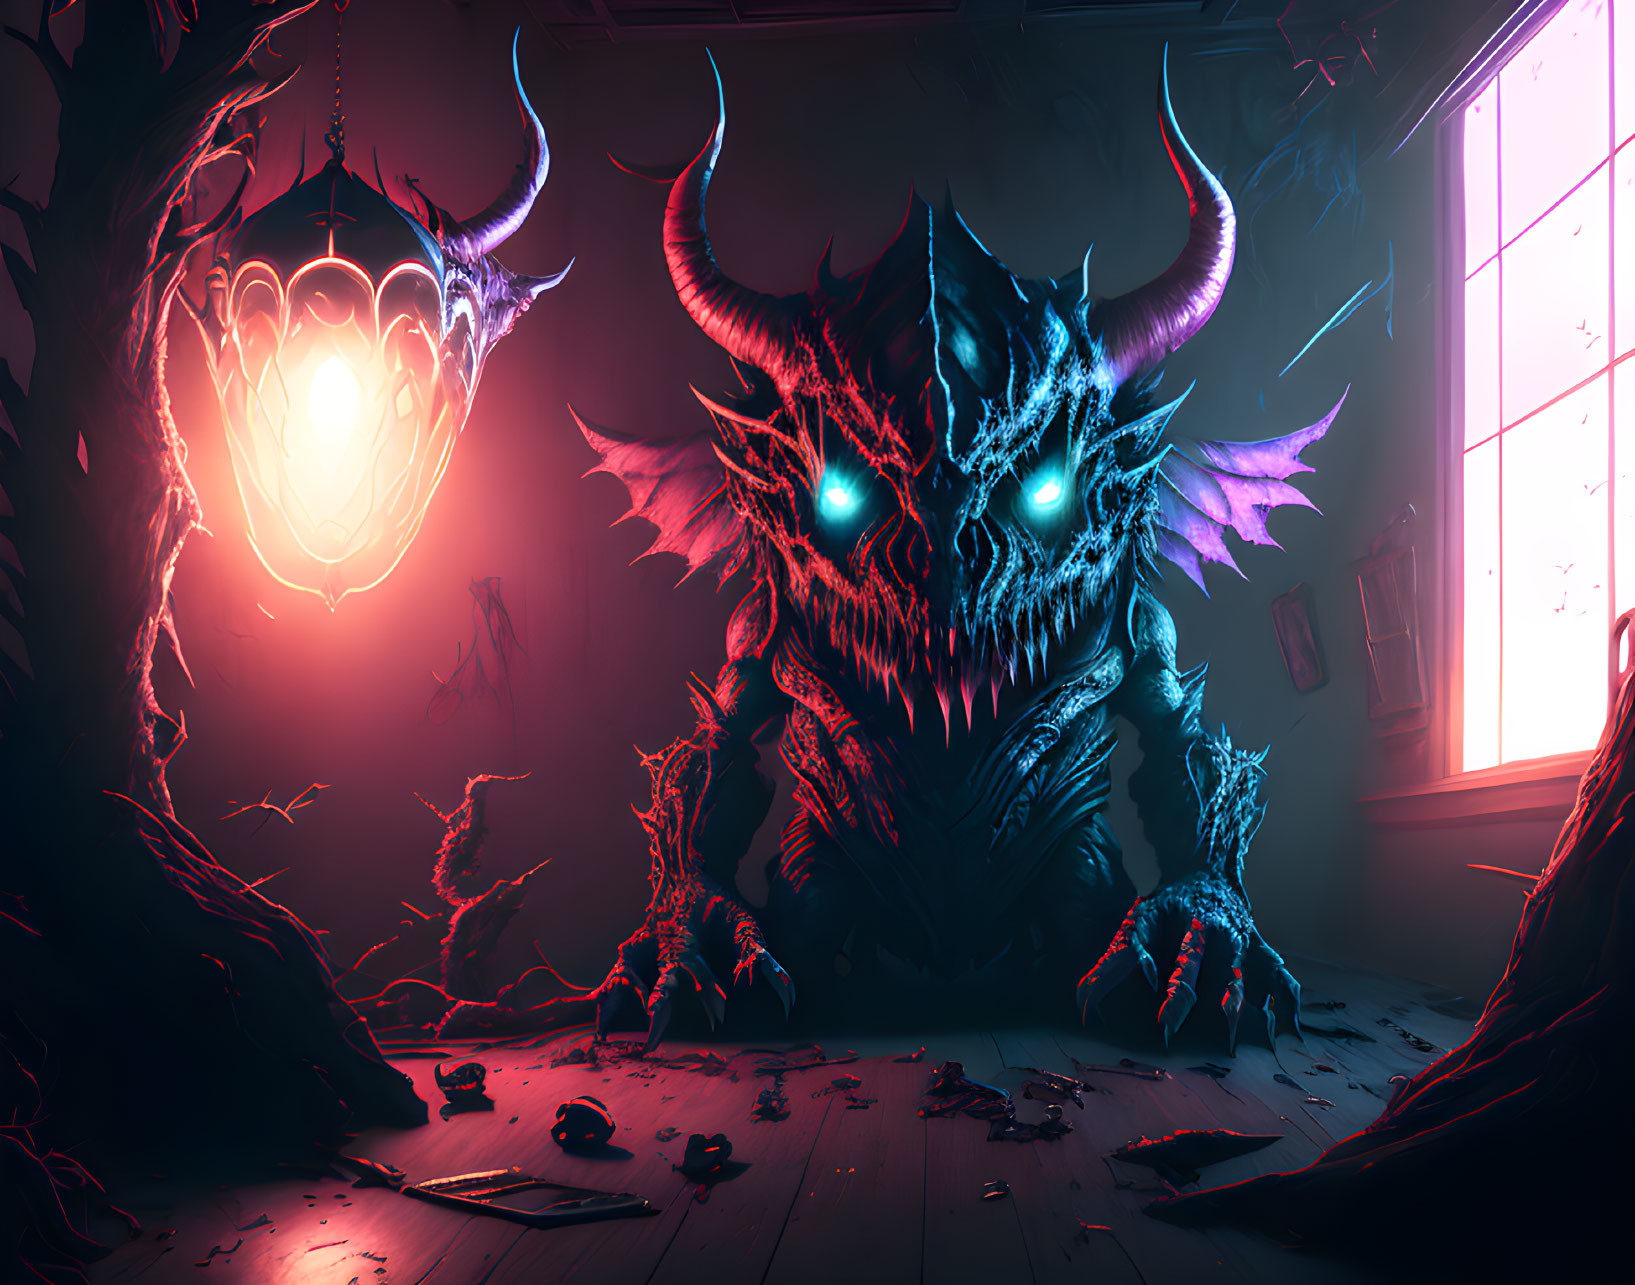 Menacing creature with red eyes and horns in dimly lit room with eerie blue light.